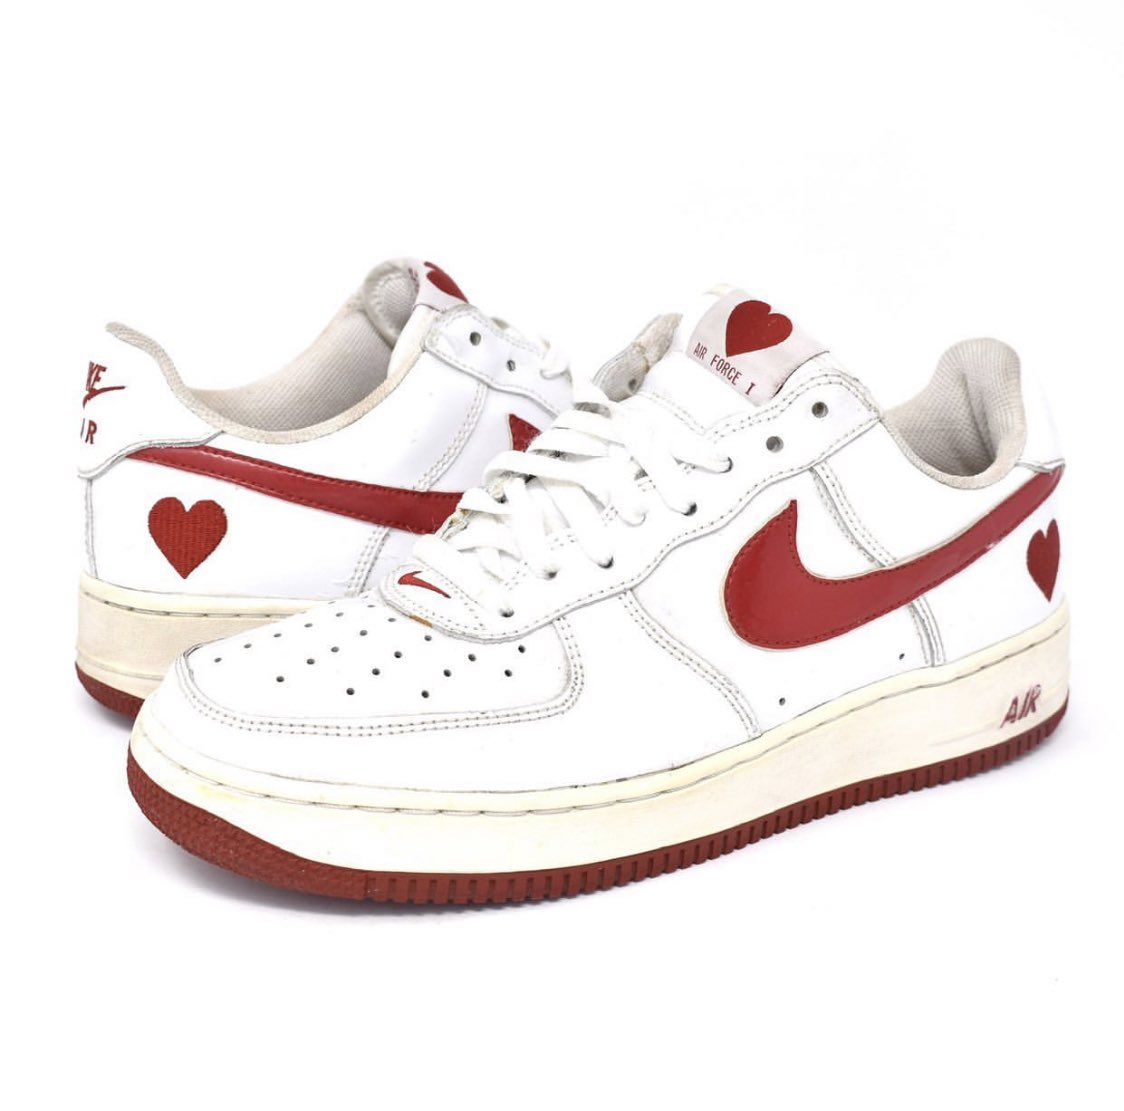 Nike's Air Force 1 'Valentine's Day' is one of the cutest sneakers ever